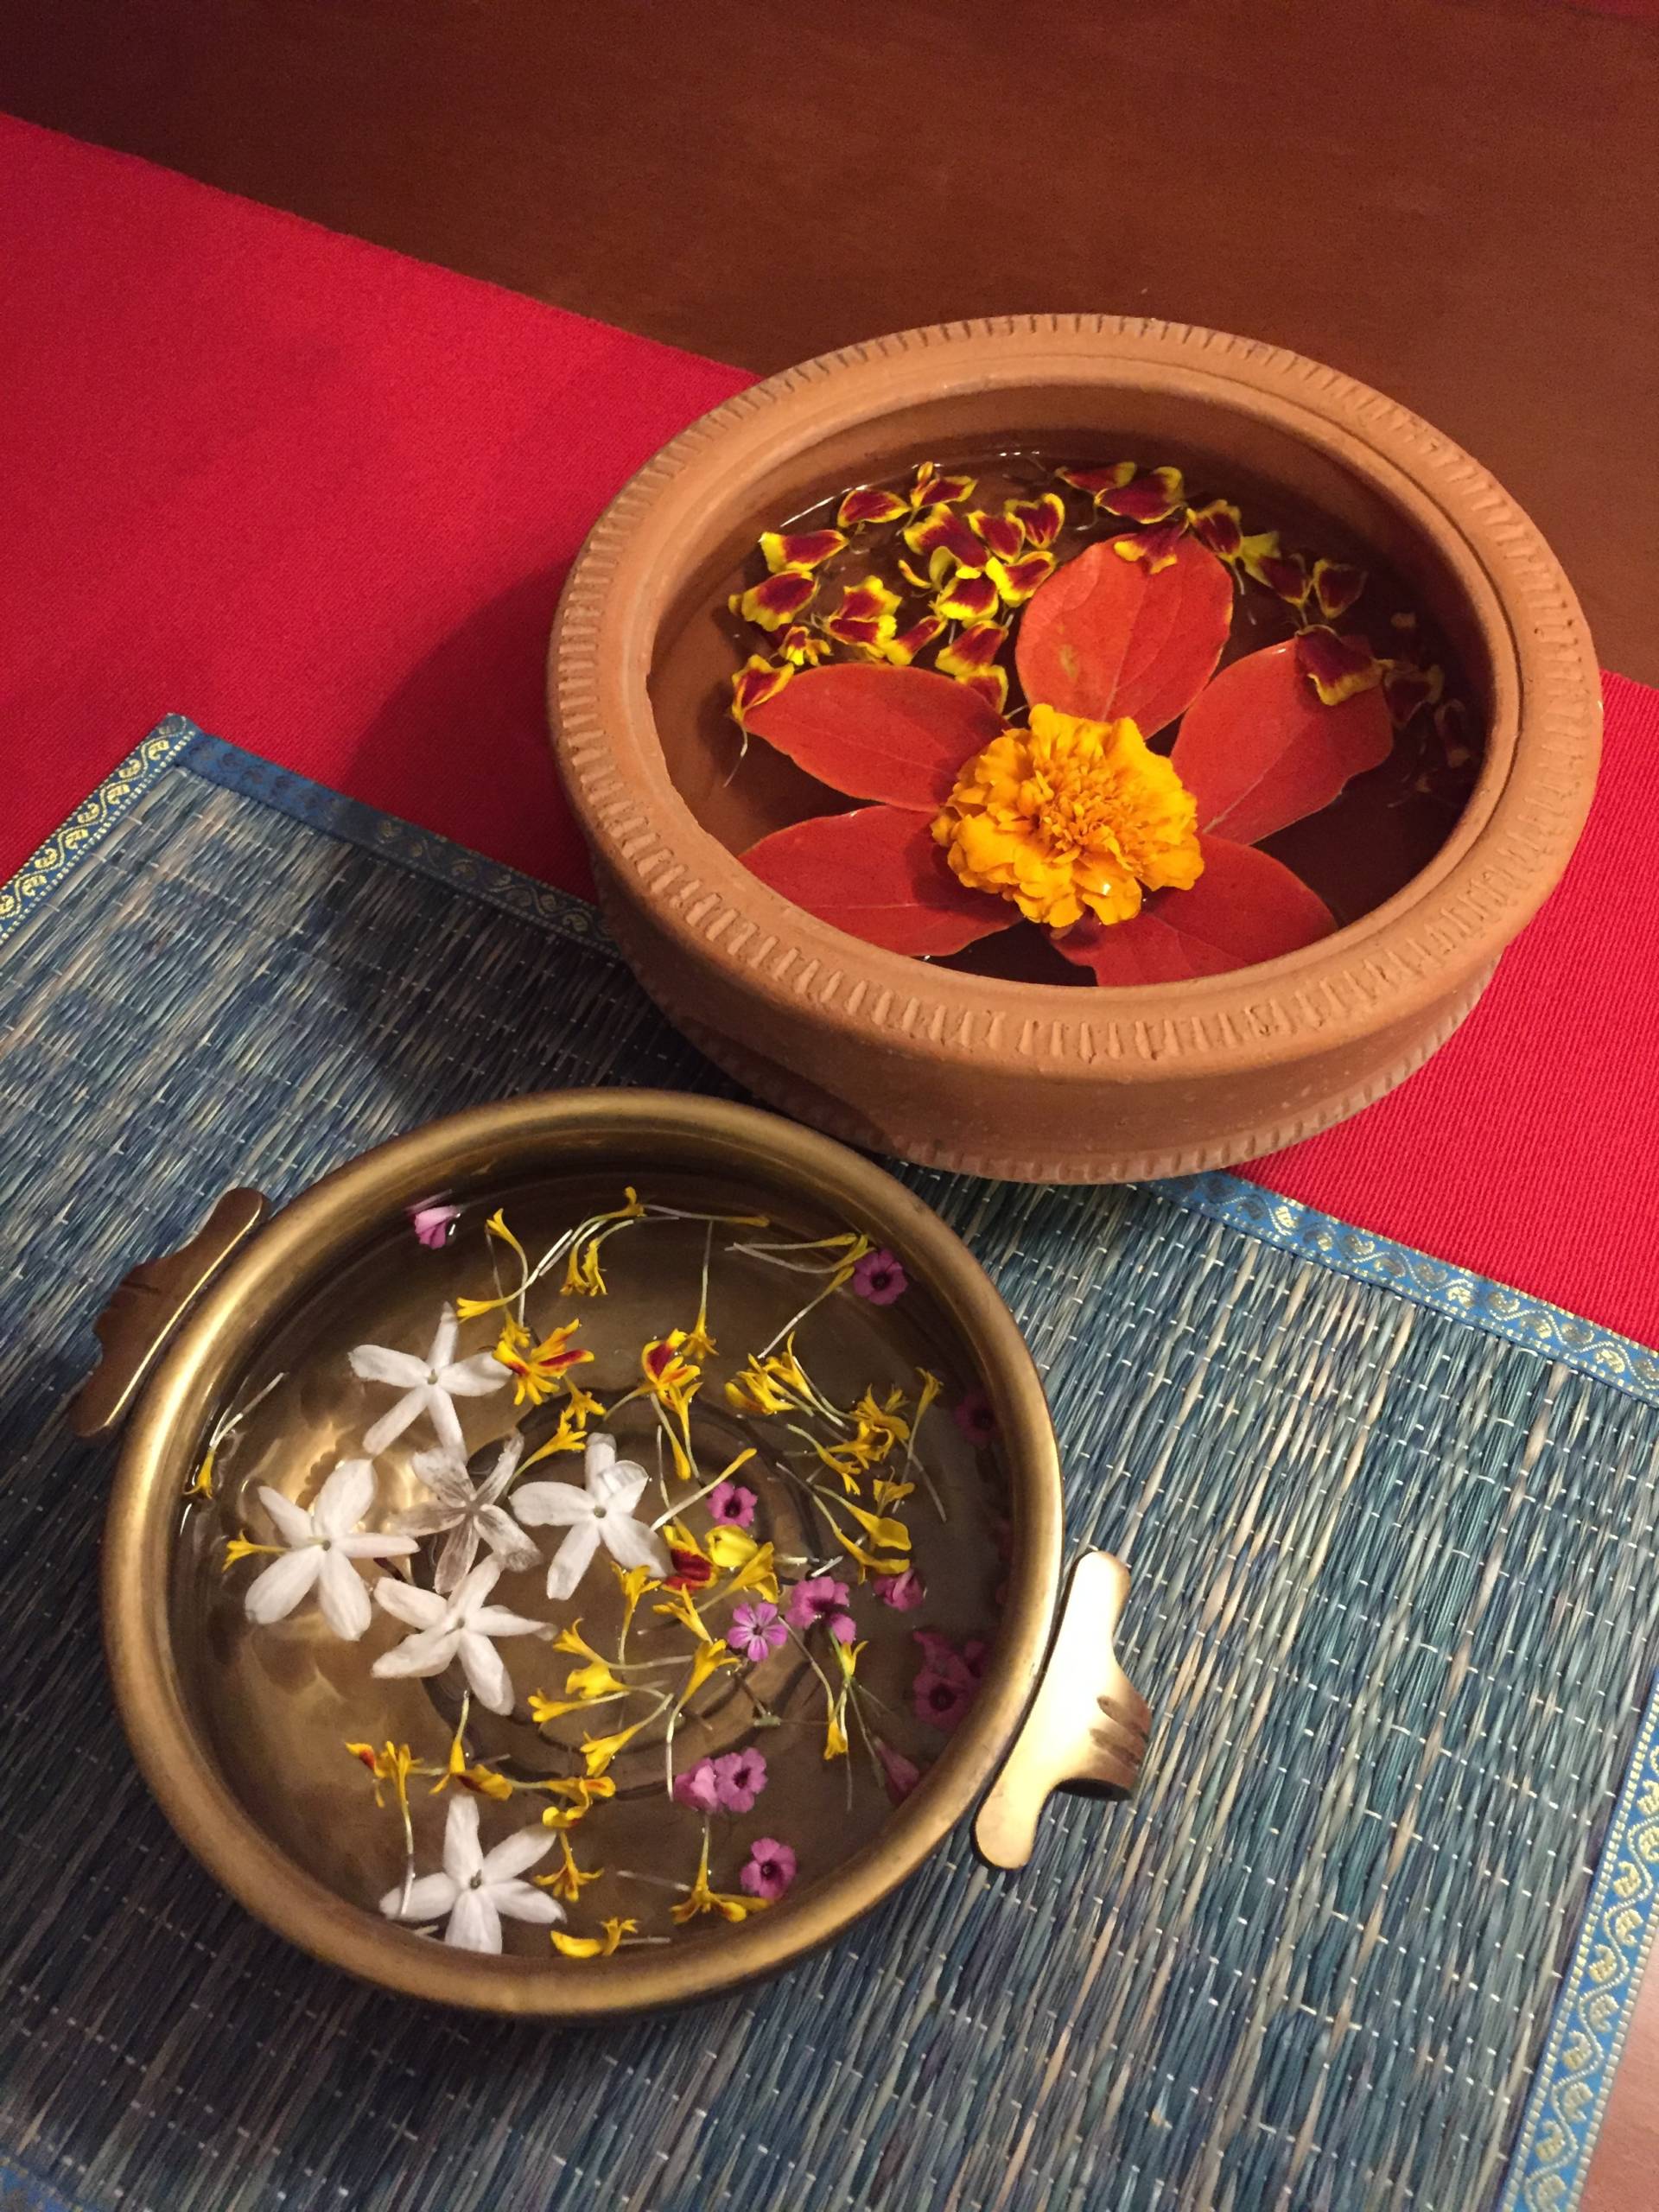 Kali Puja dinner table decor features California fall colors and local flowers including sorrel.